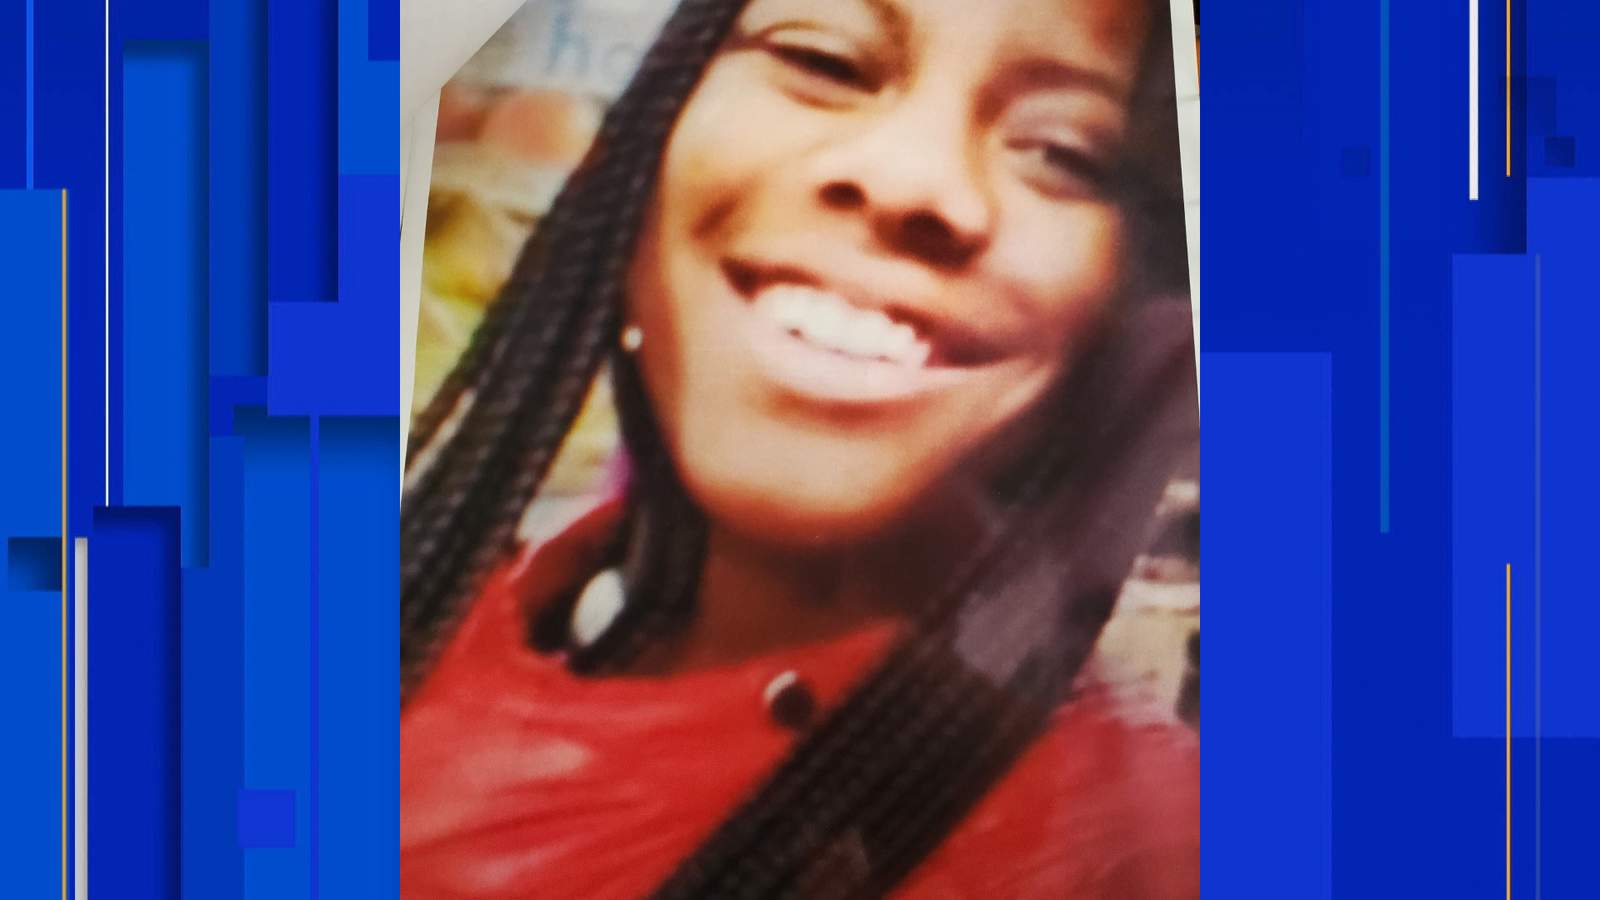 Detroit police looking for missing 15-year-old girl who left home Wednesday